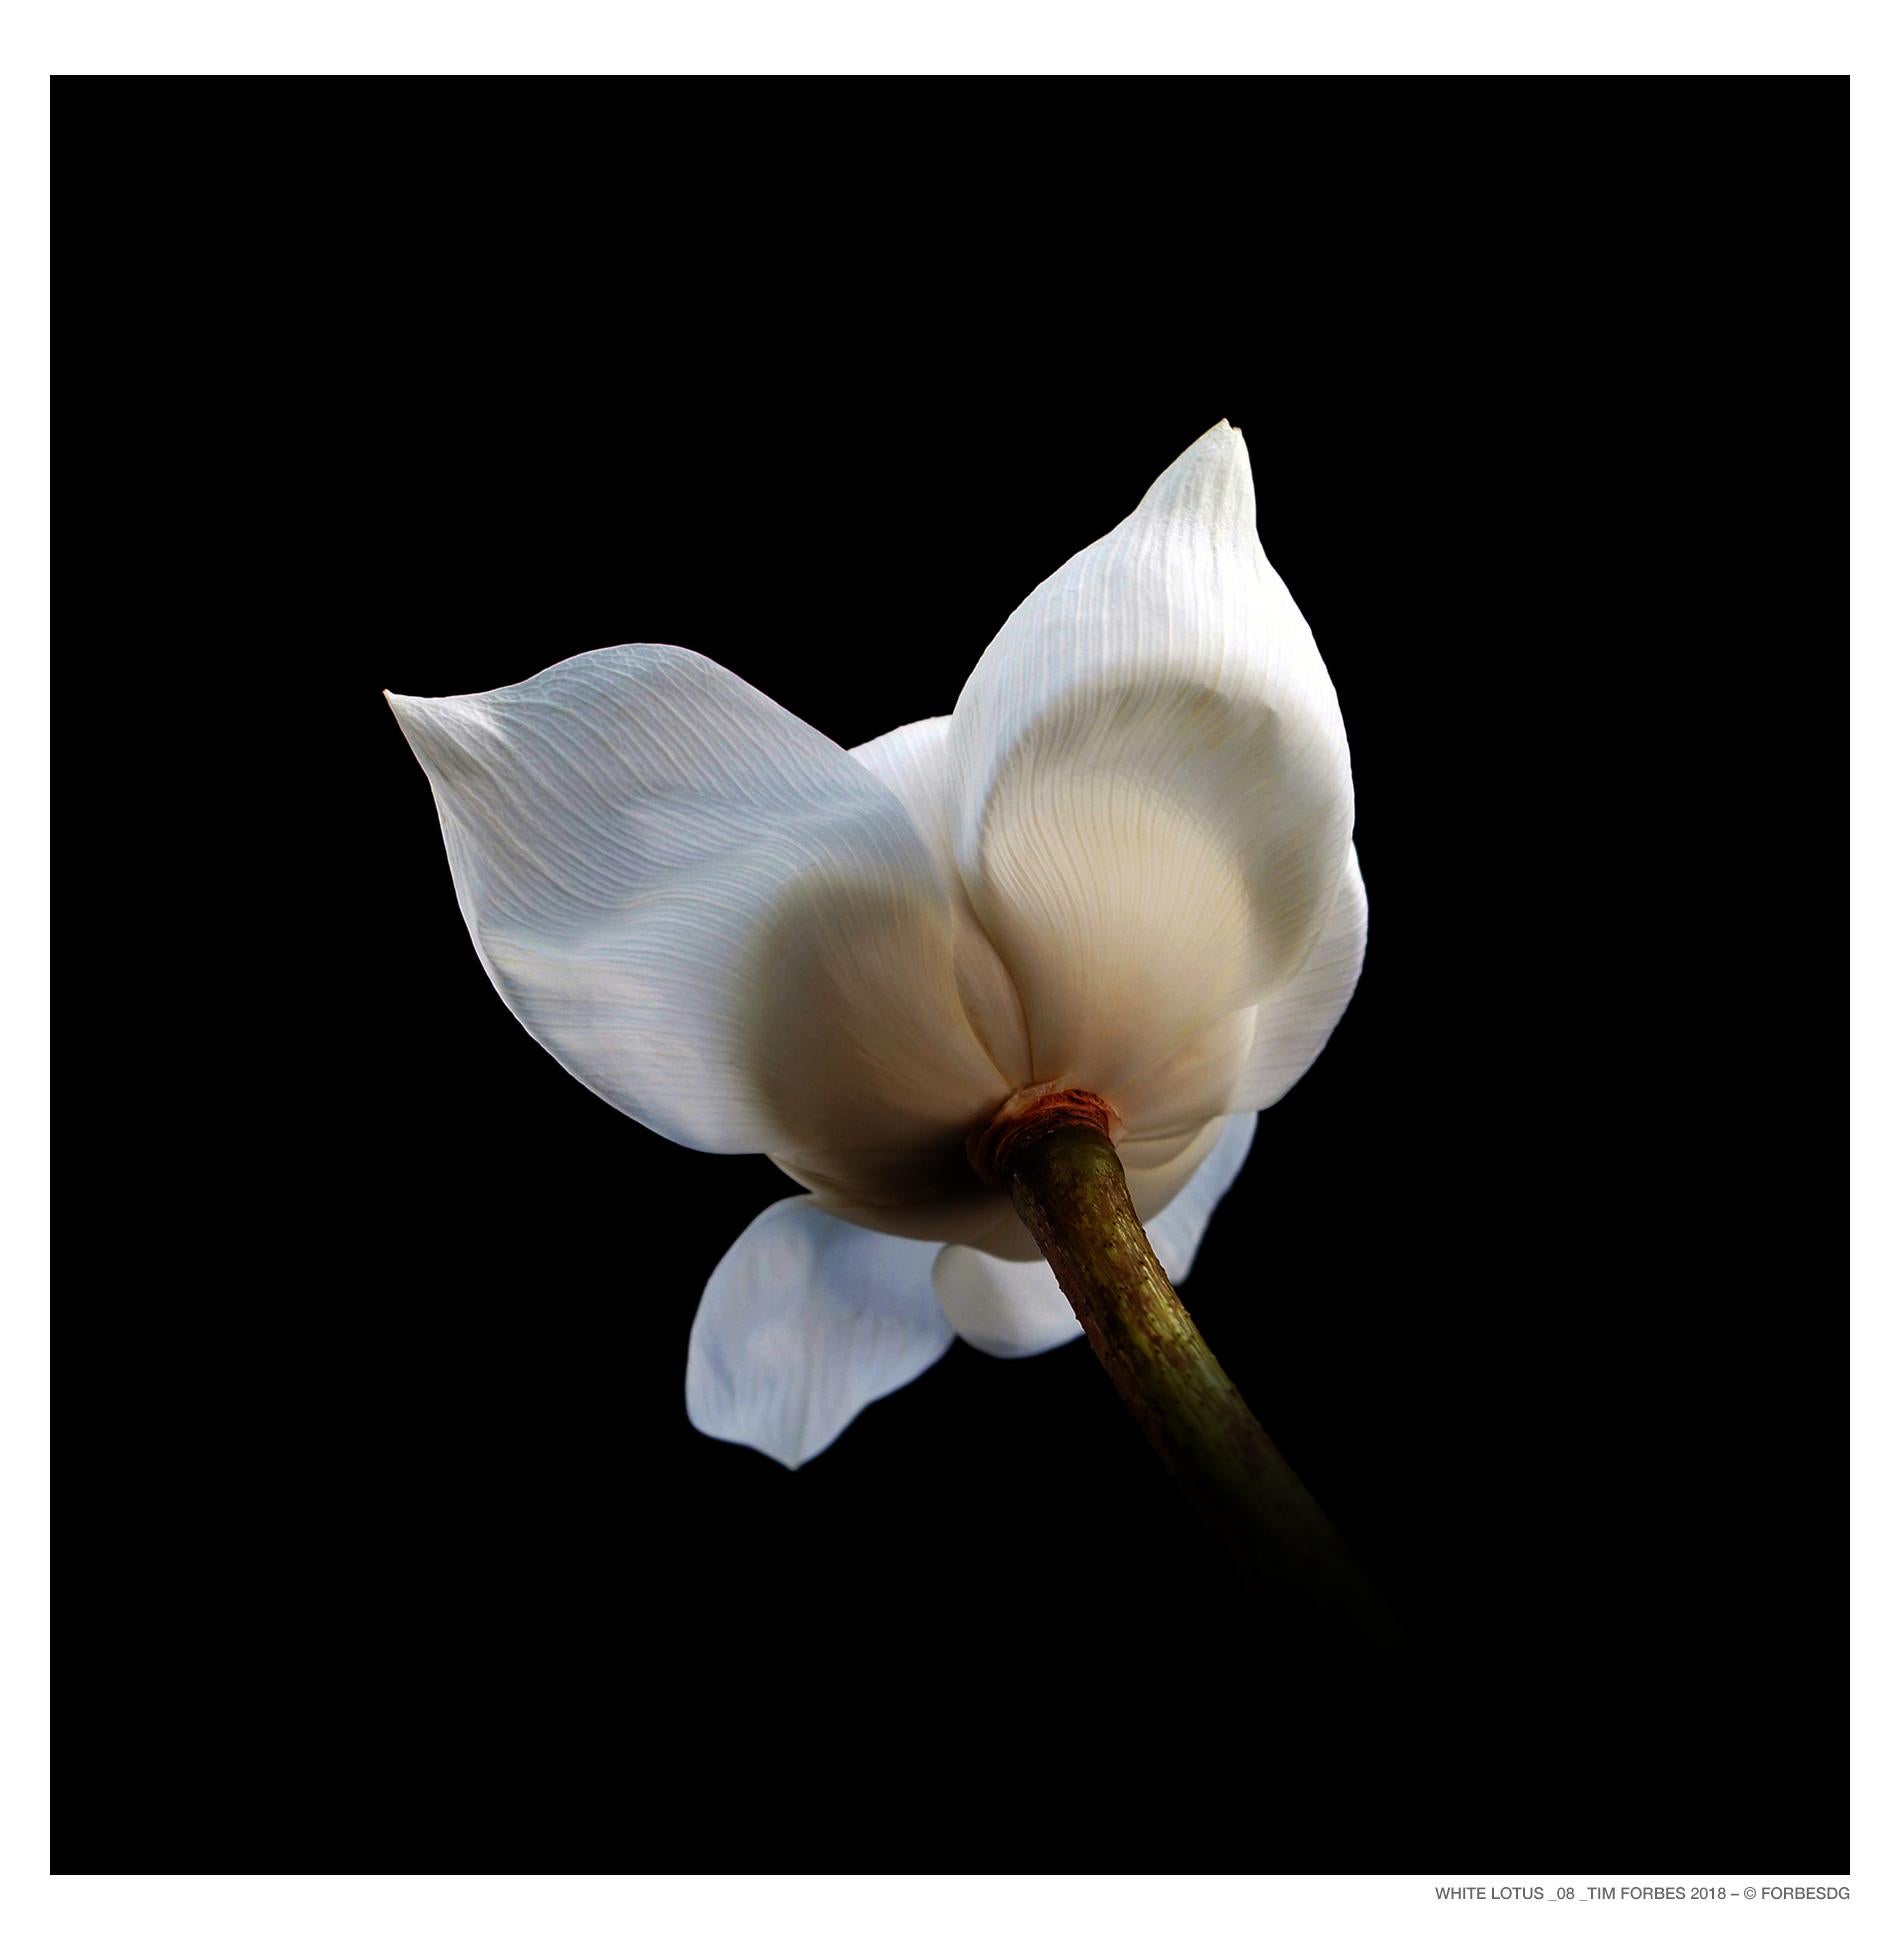 White Lotus_8 - Photograph by Tim Forbes